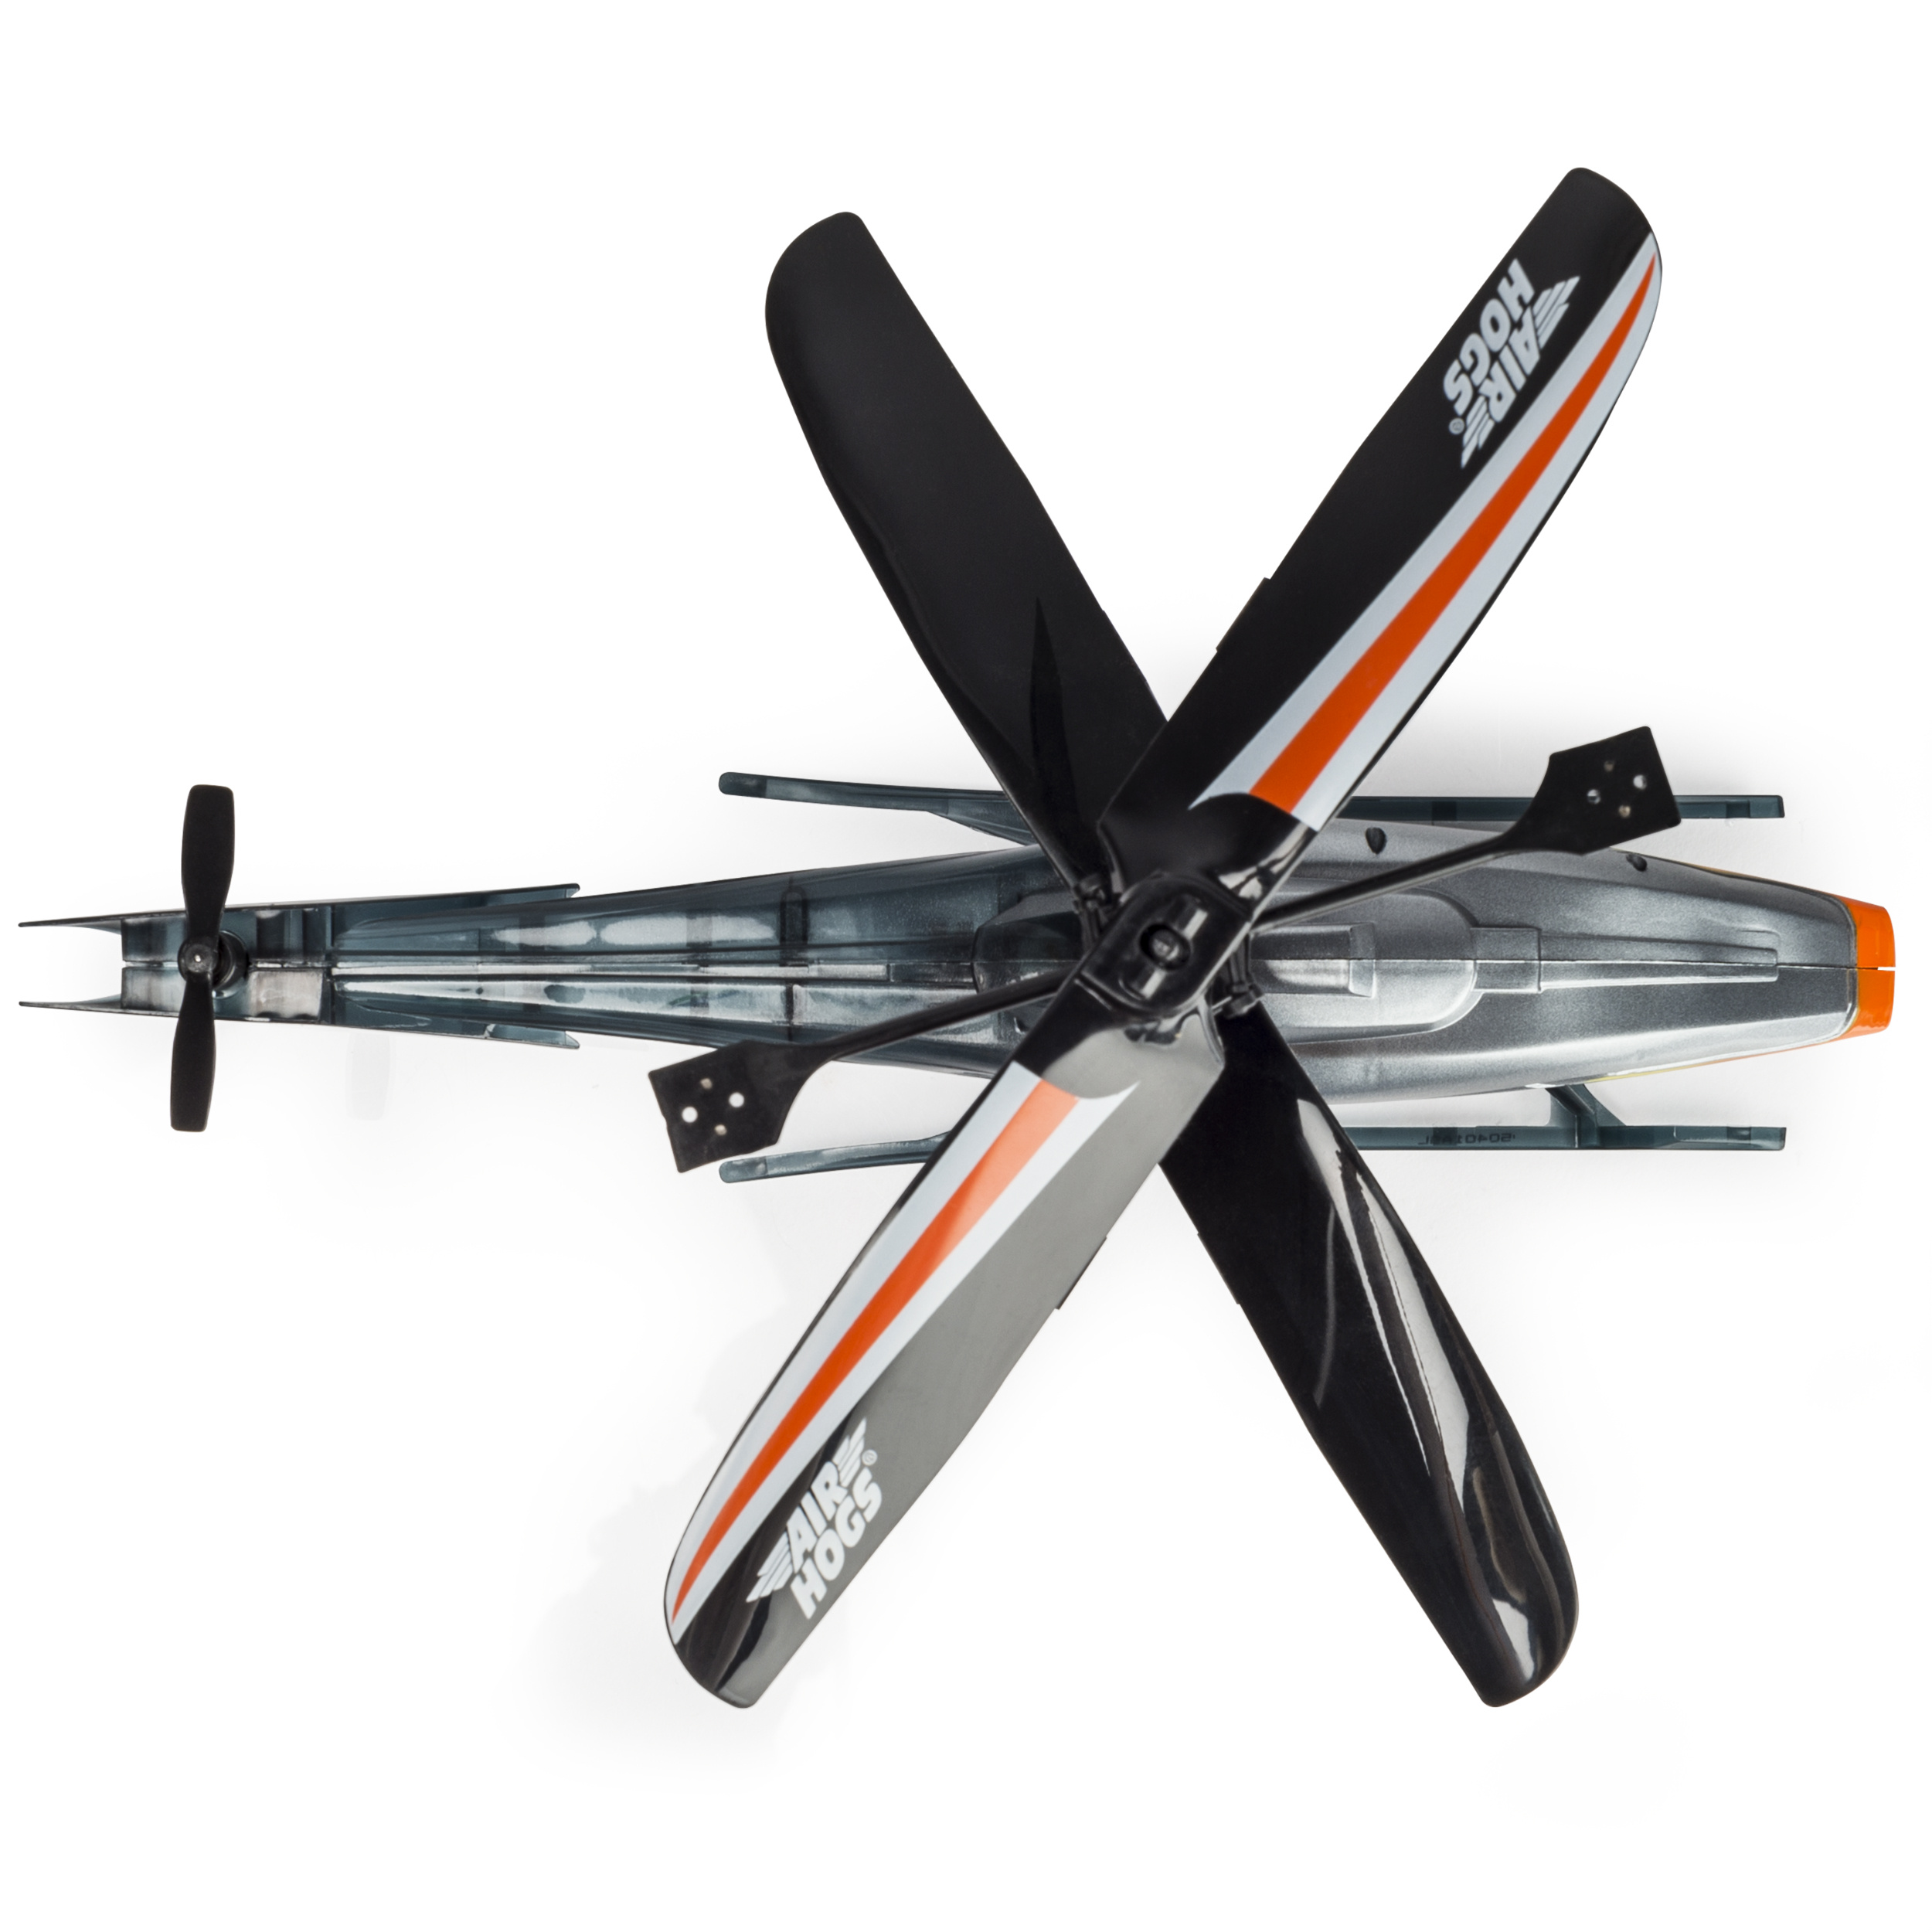 Air Hogs RC Axis 300X, Gray R/C Helicopter with Batteries - image 4 of 6